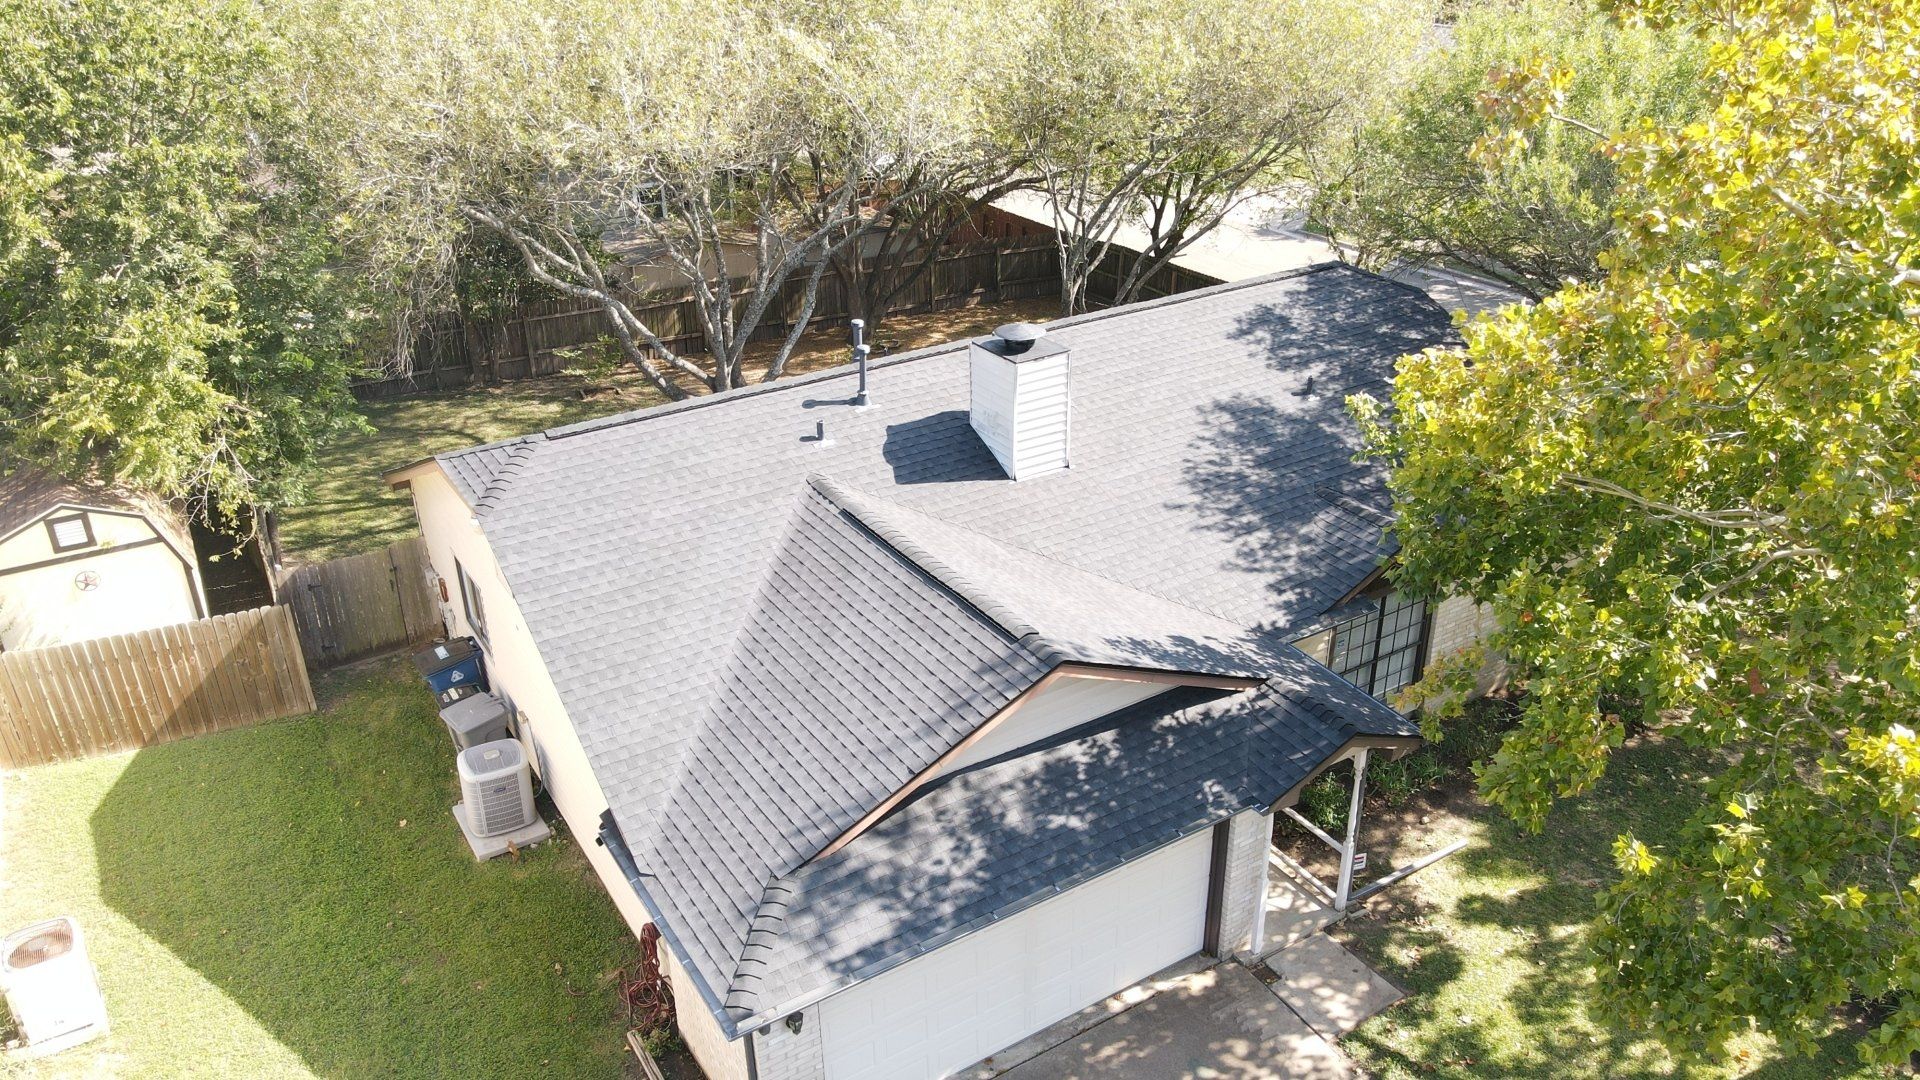 Arial view of a residential home with a new roof